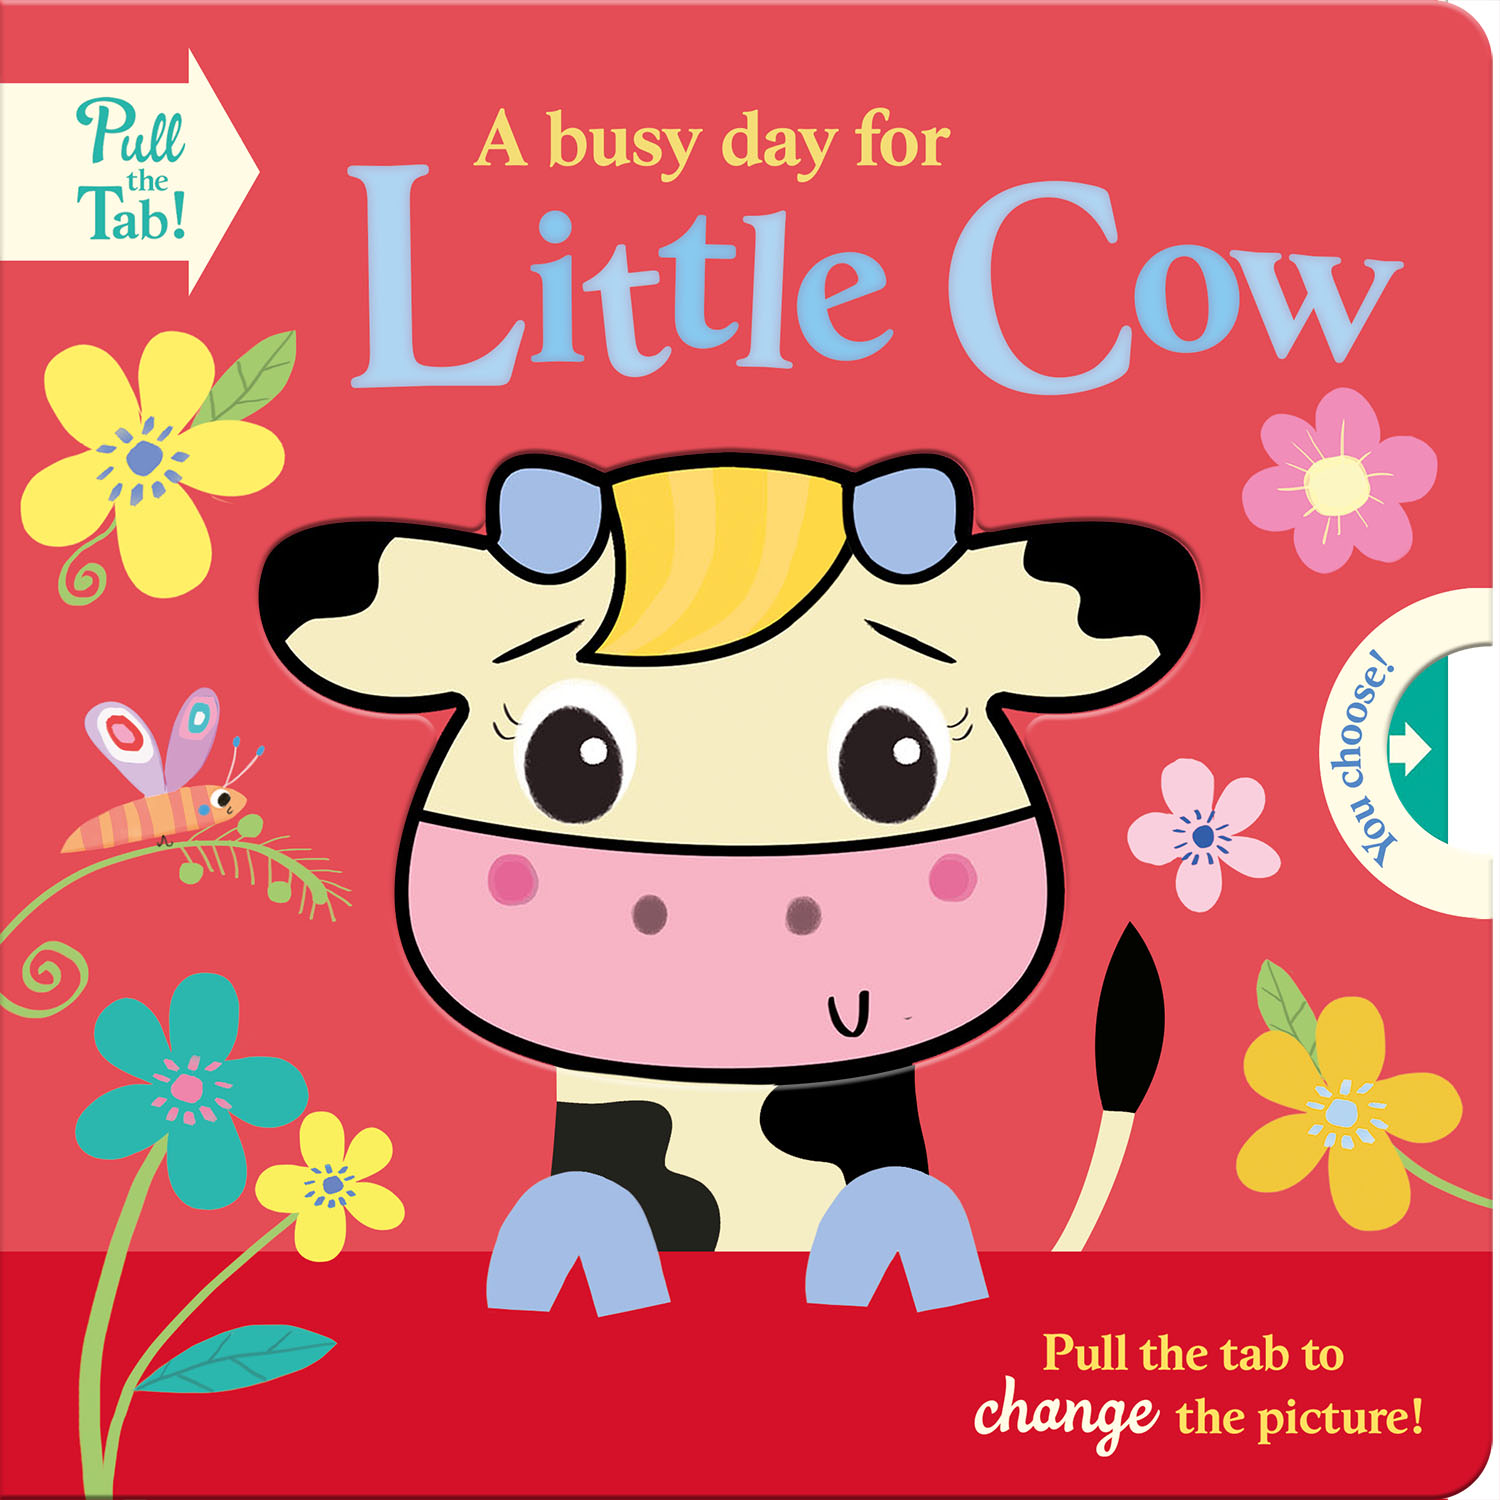 A BUSY DAY FOR LITTLE COW